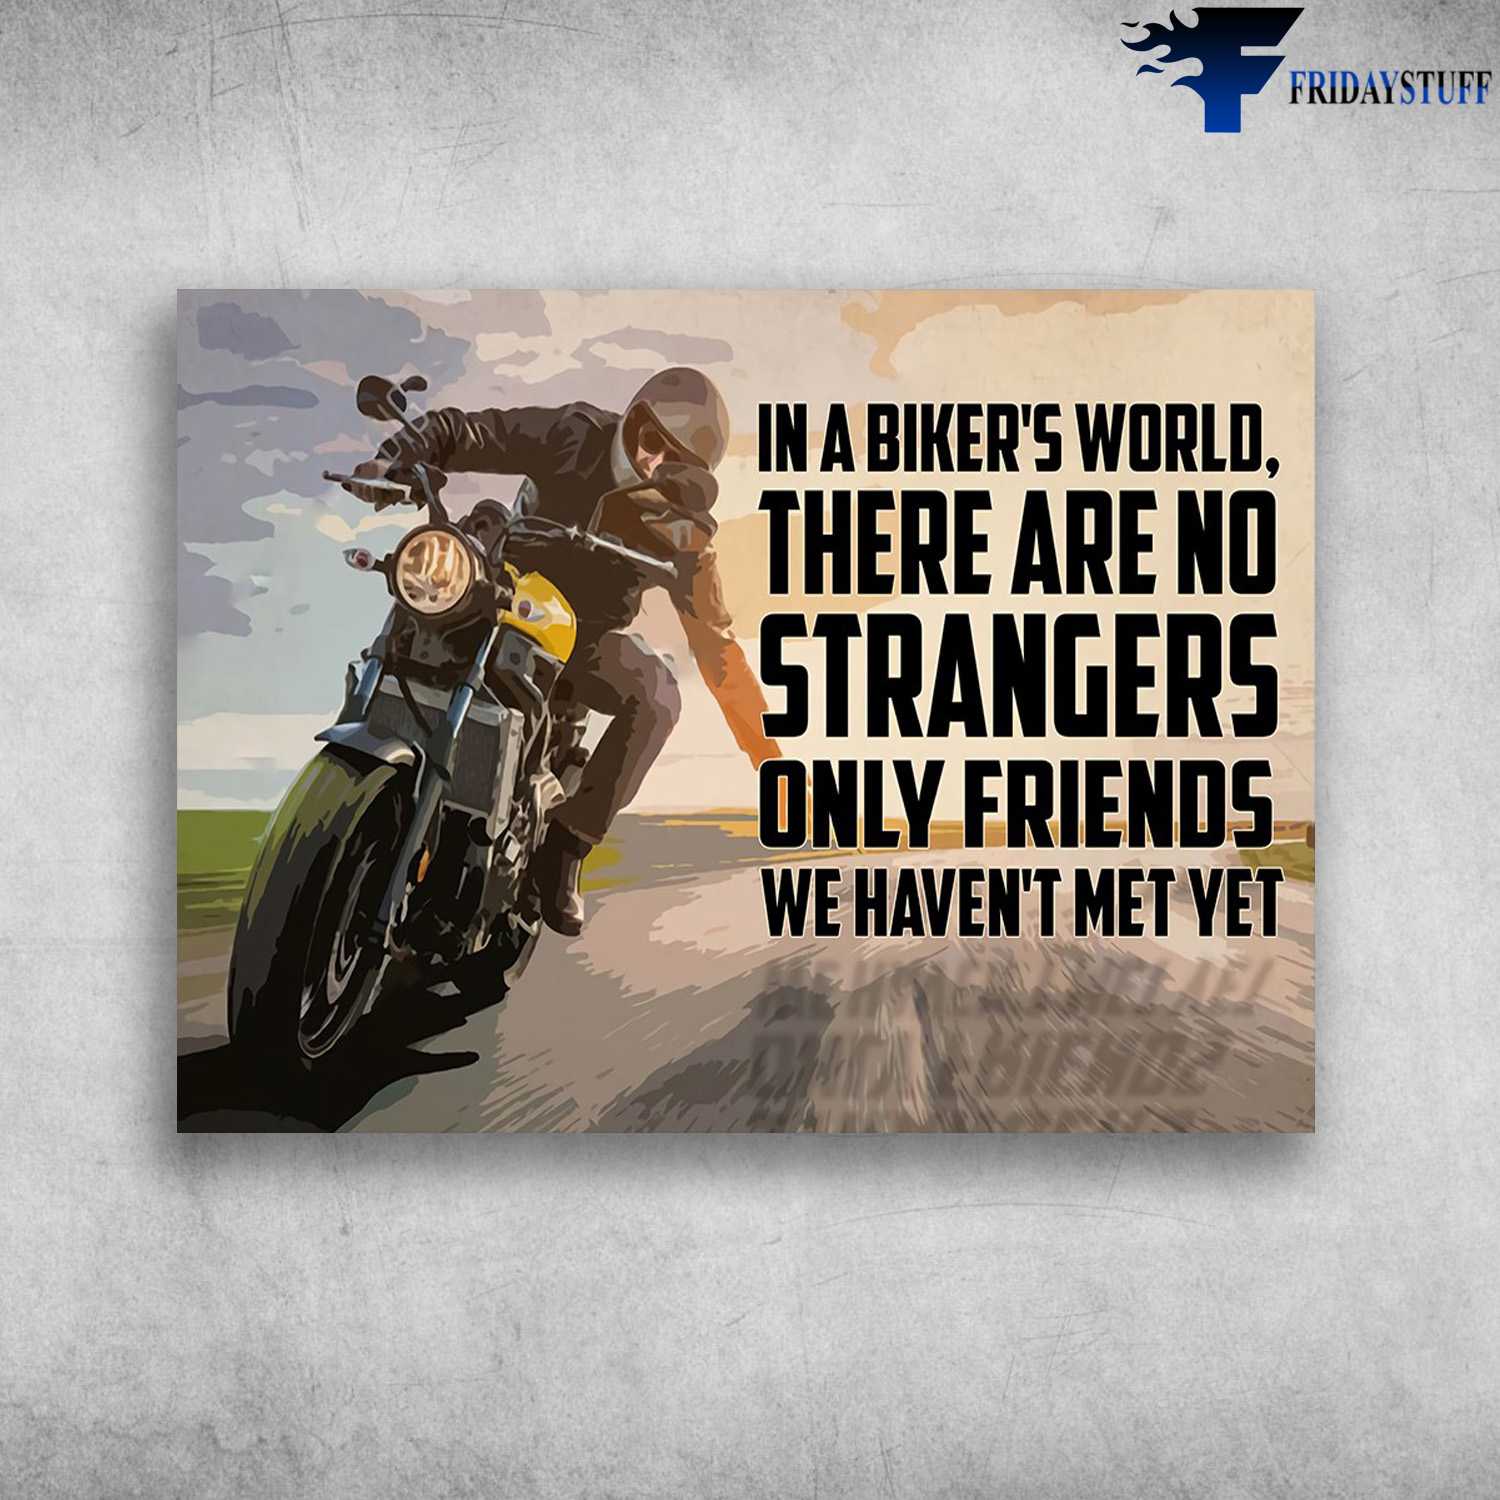 Motorcycle Riding, Biker Motobike - In A Biker's World, There Are No Strangers, Only Friends We Haven't Met Yet